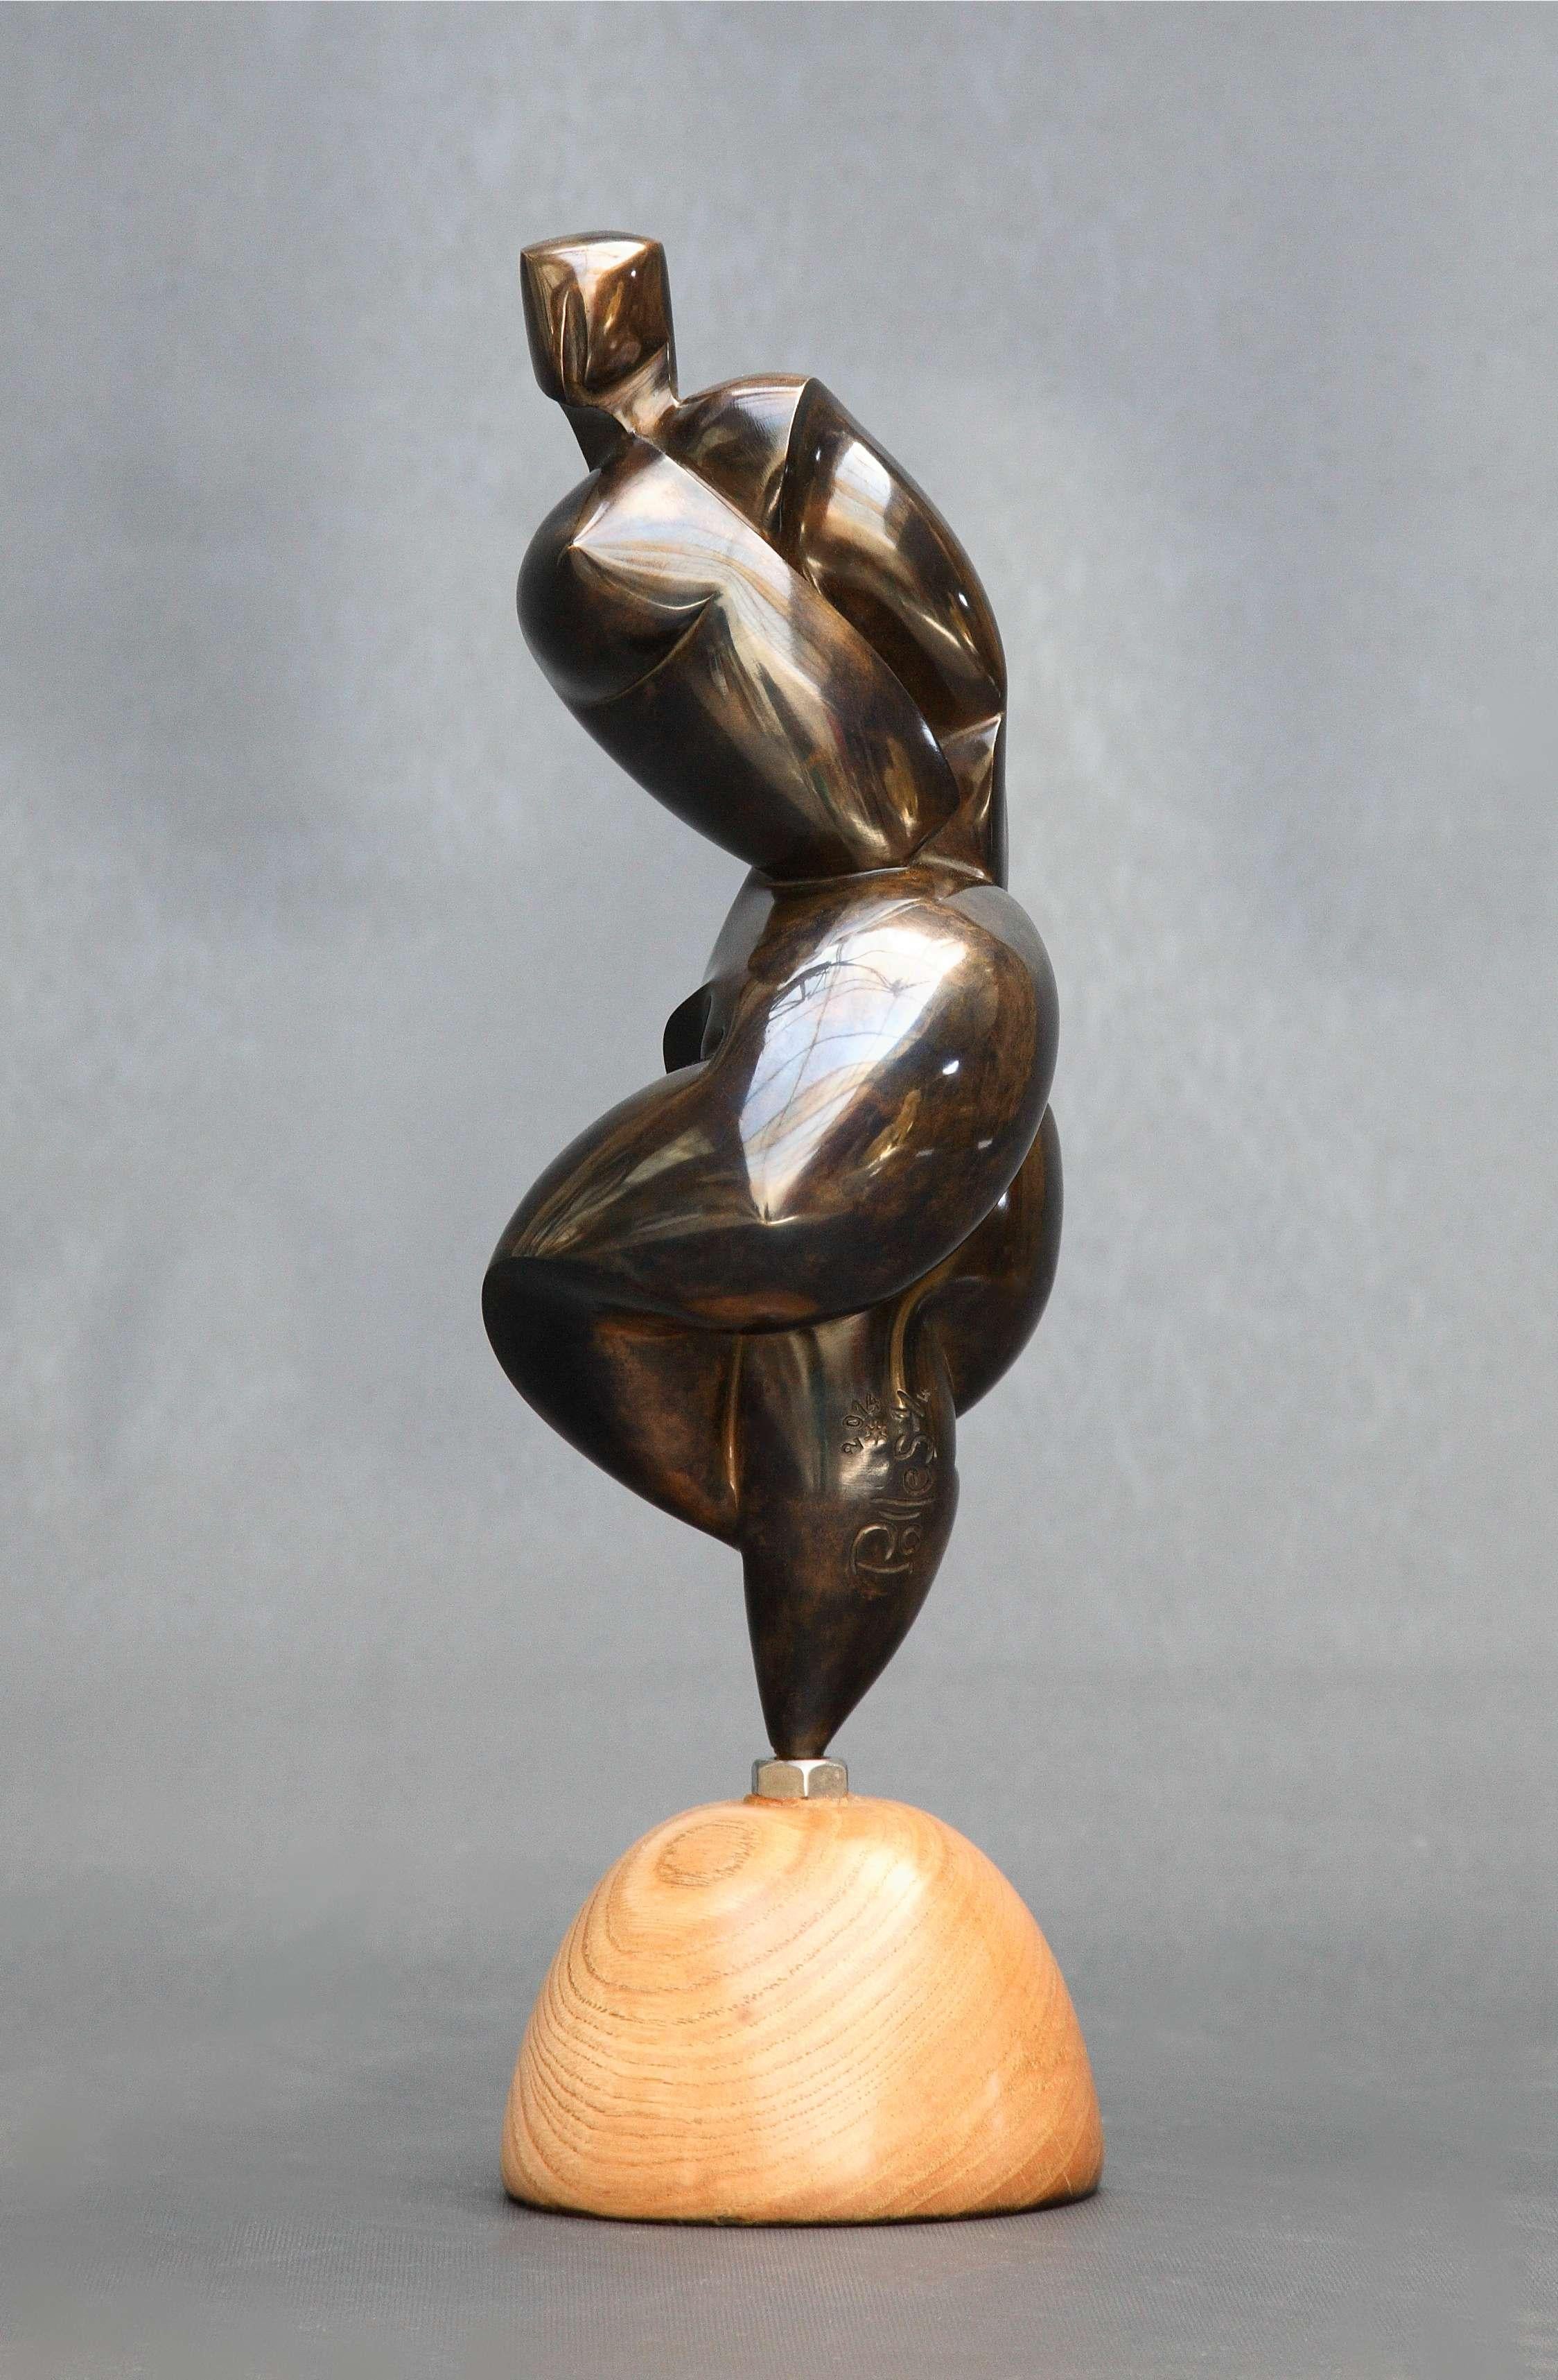 Pollès - Bronze Sculpture - Ahlem
Bronze
1/4
Created in 2013, casted in 2014
20 x 13 x 11 cm
Signed and Numbered

BIOGRAPHY
Pollès was born in Paris in 1945
Like Leonard de Vinci in an anatomical search of perfection, of representation of